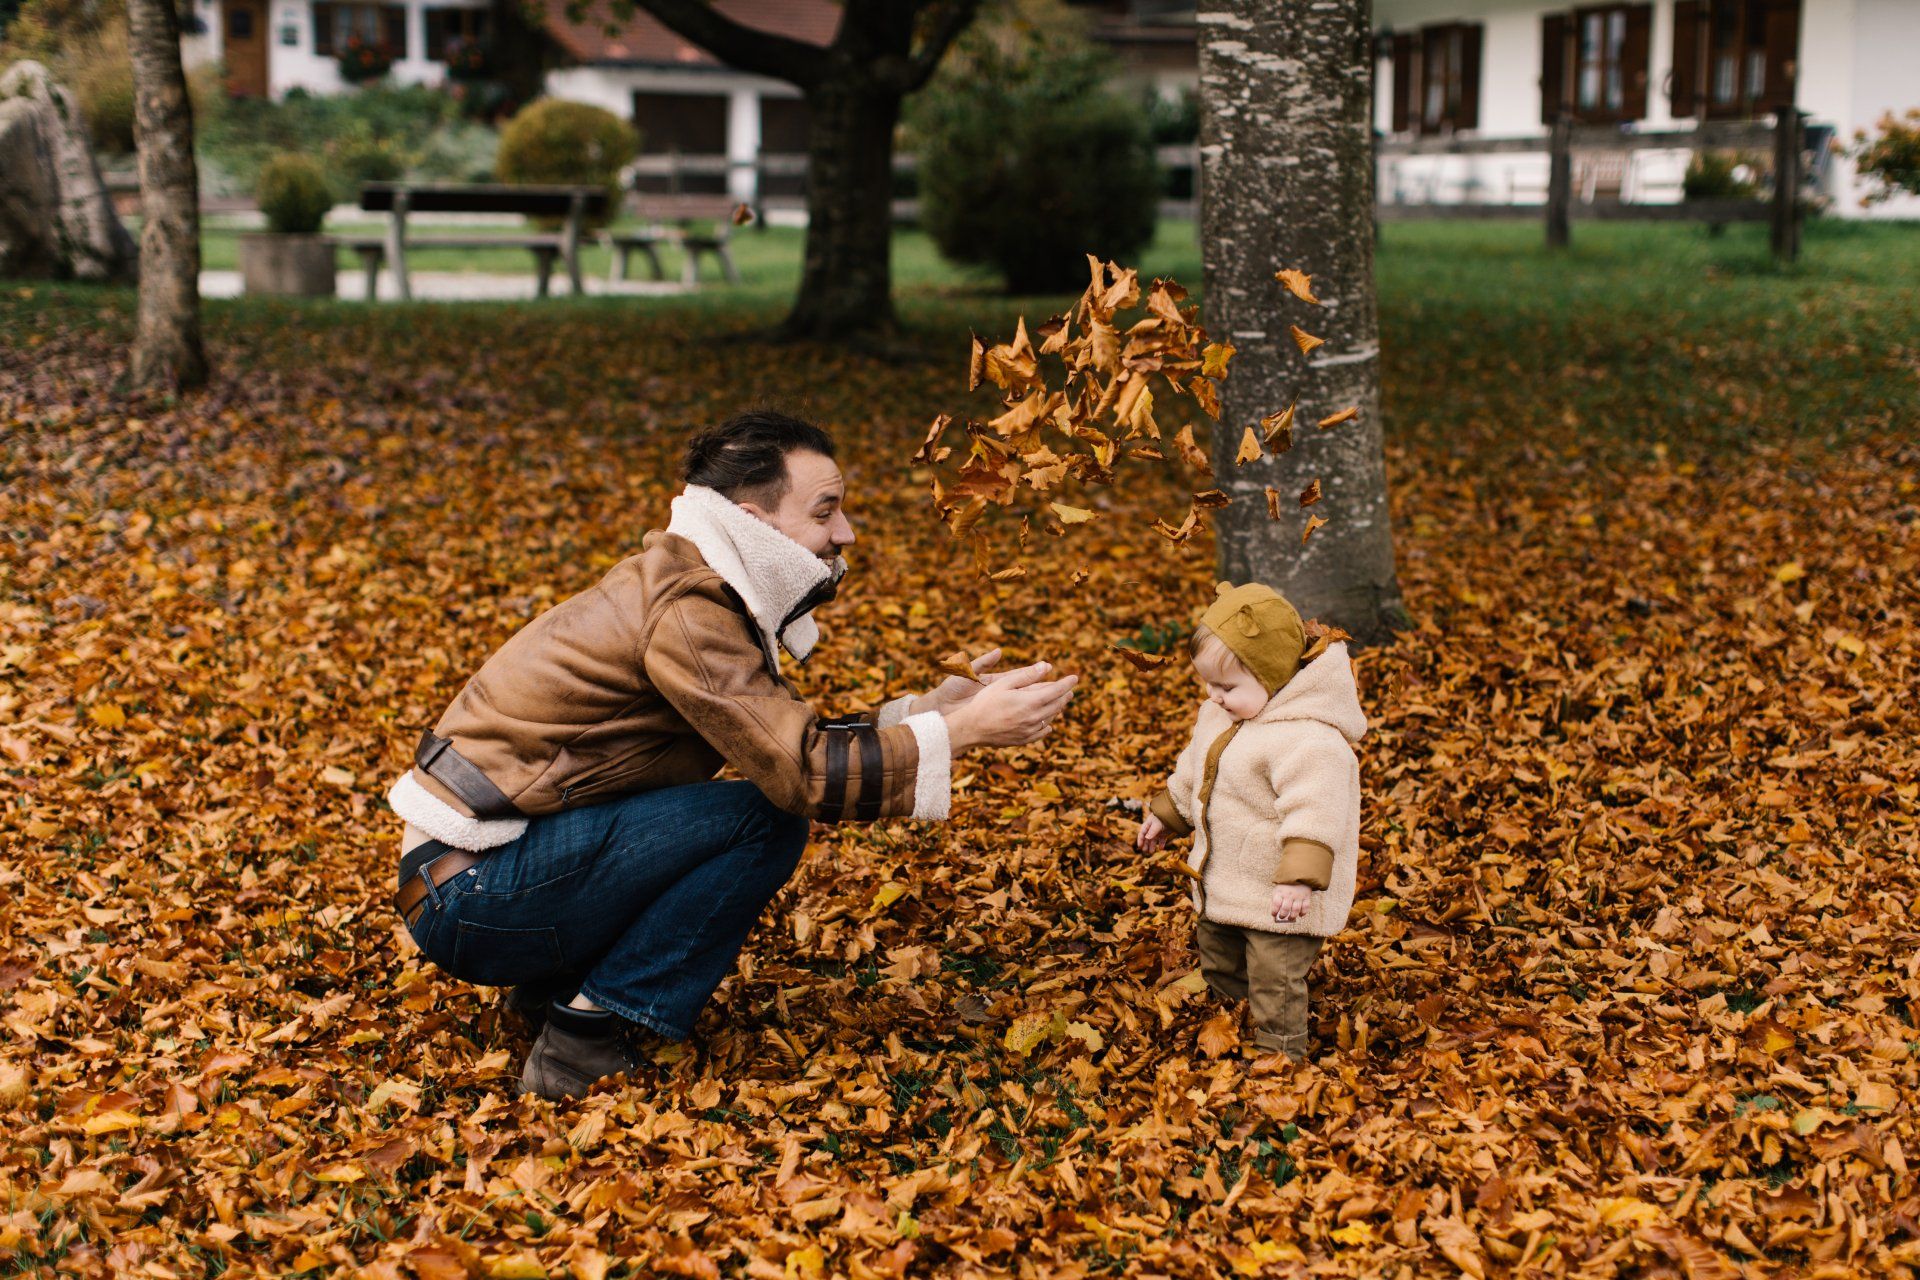 A man and a child are playing with leaves in a park.